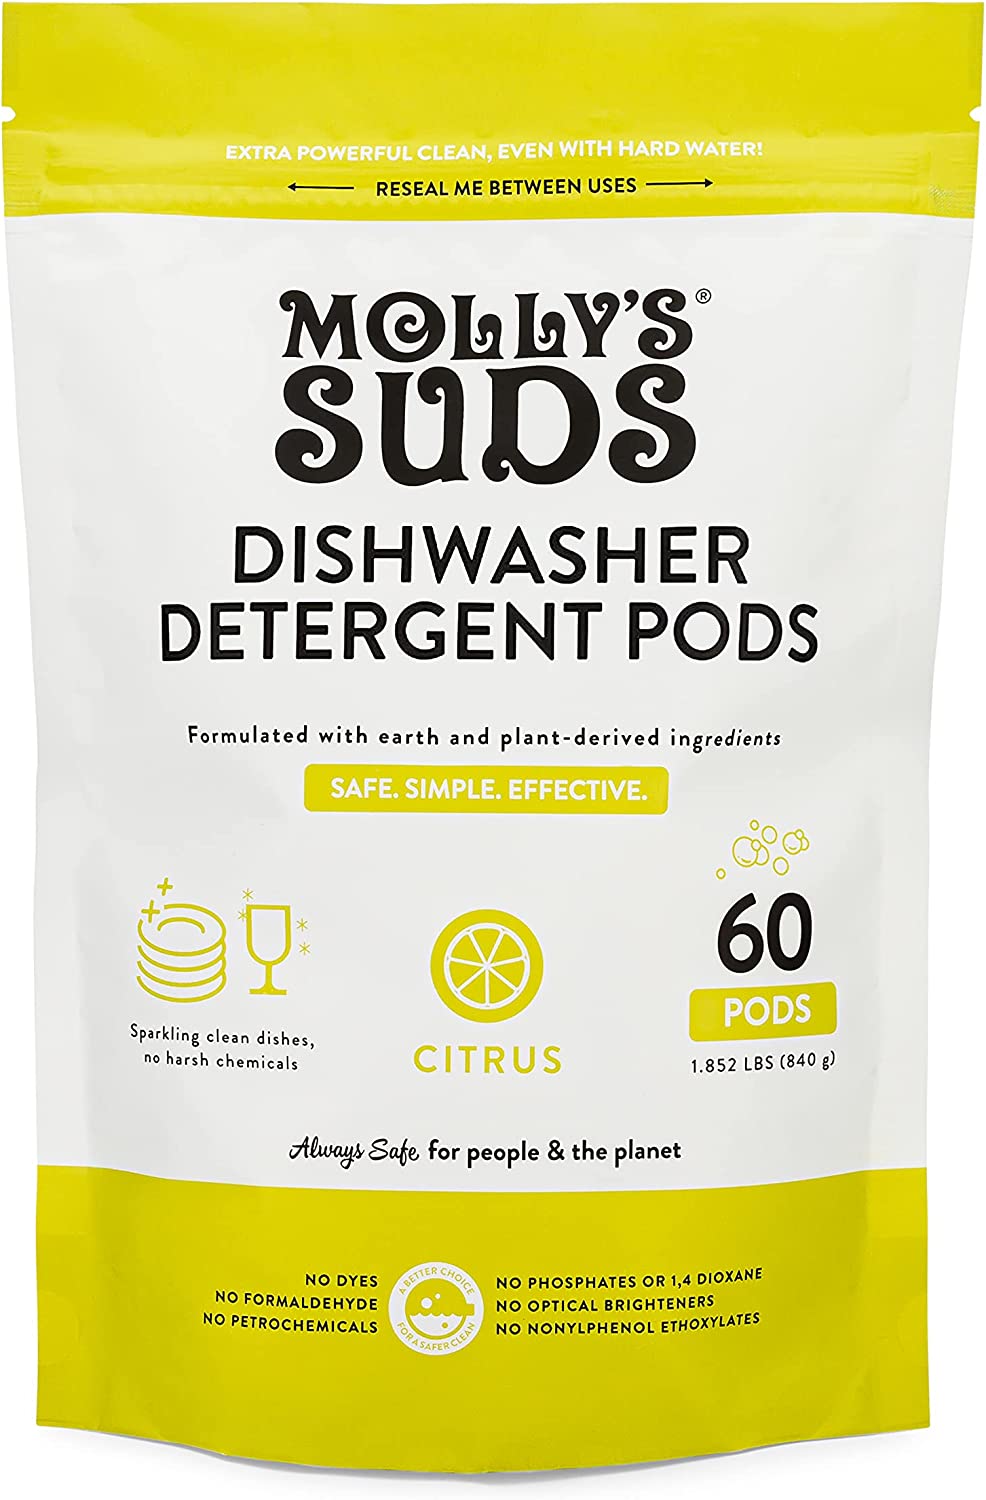 Molly_s Suds Dishwasher Pods